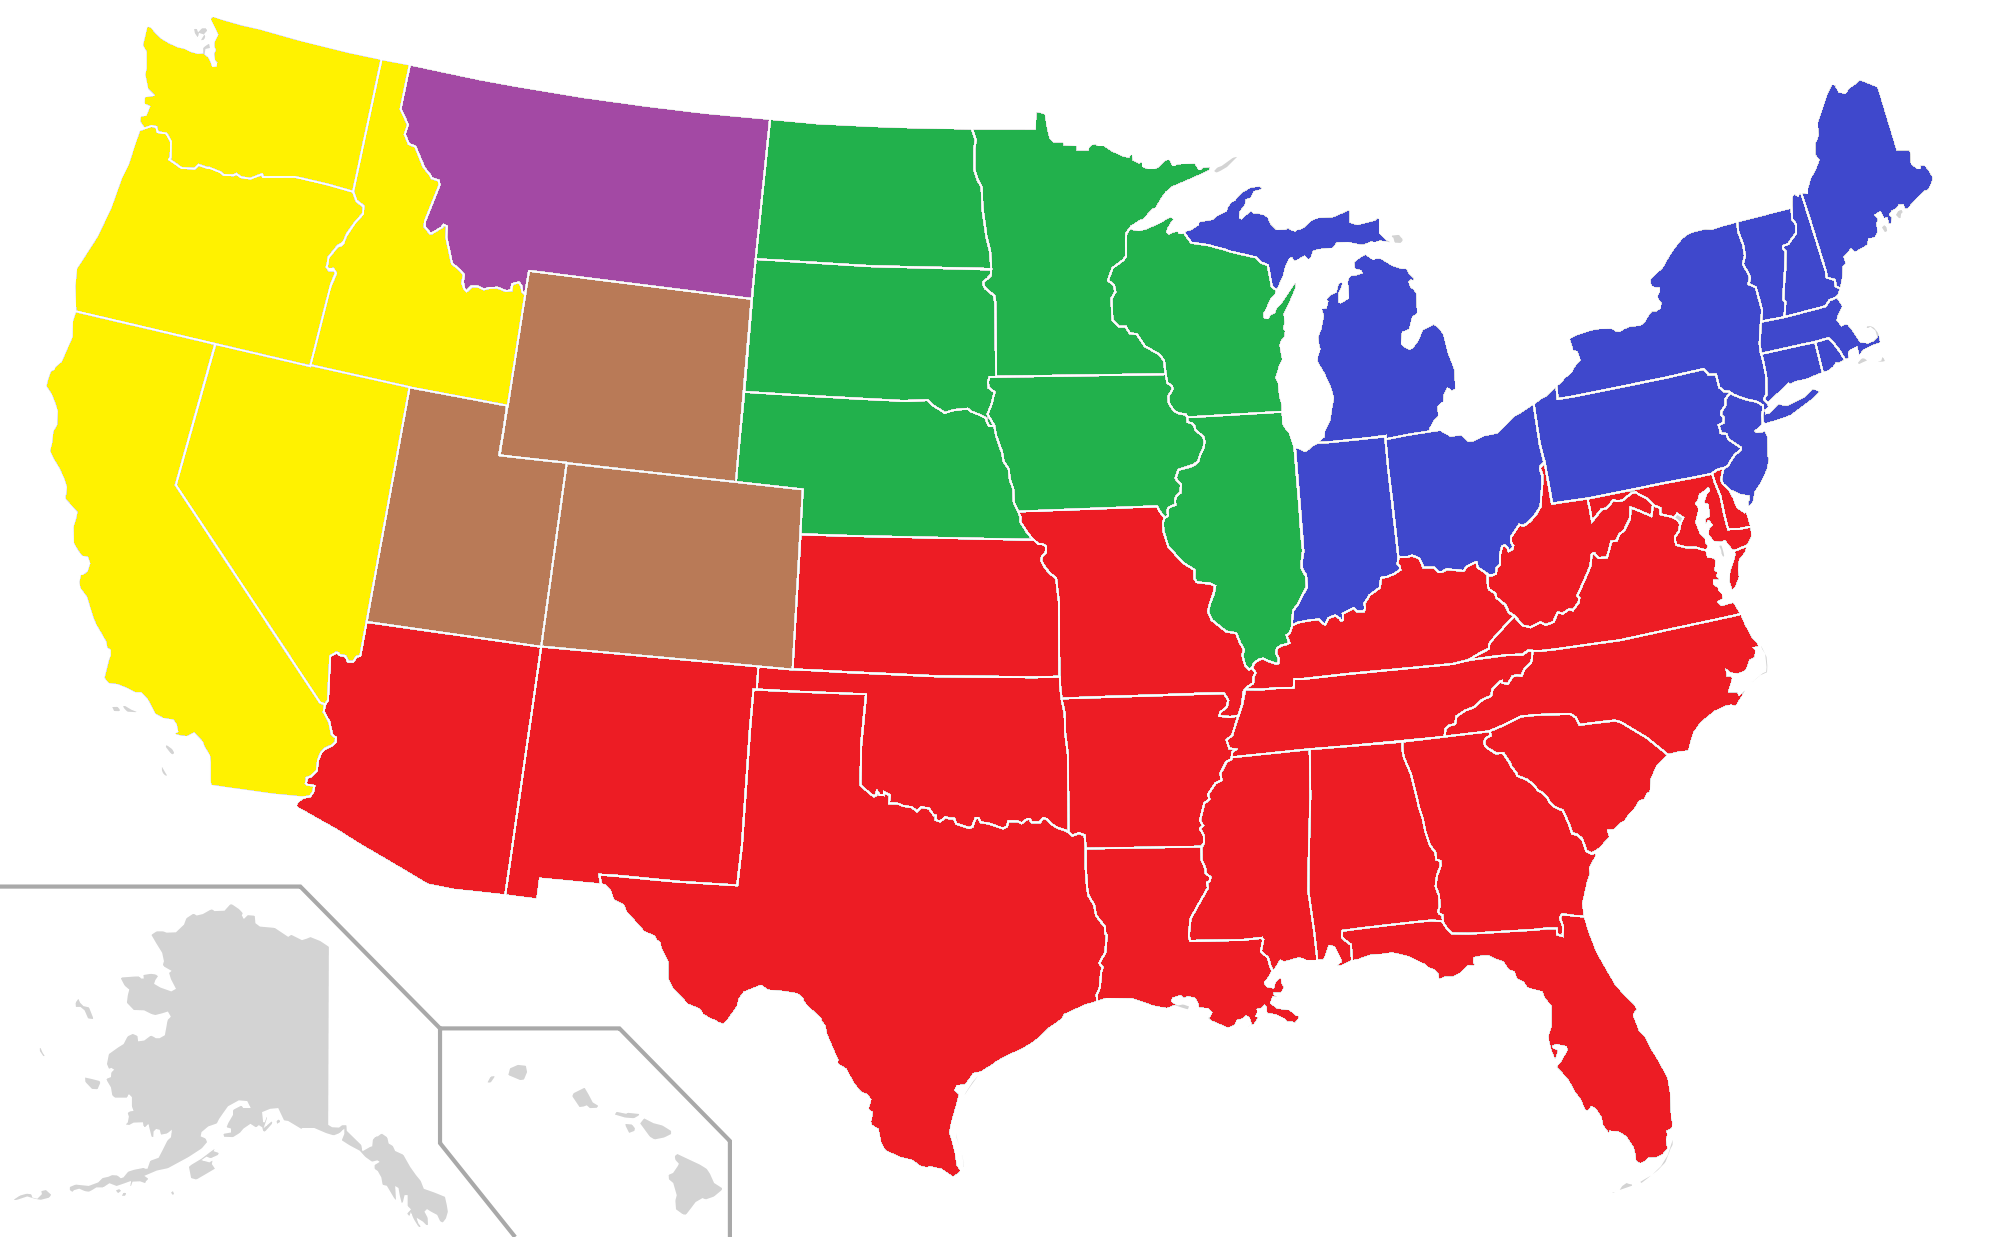 Blank United States Map - ClipArt Best